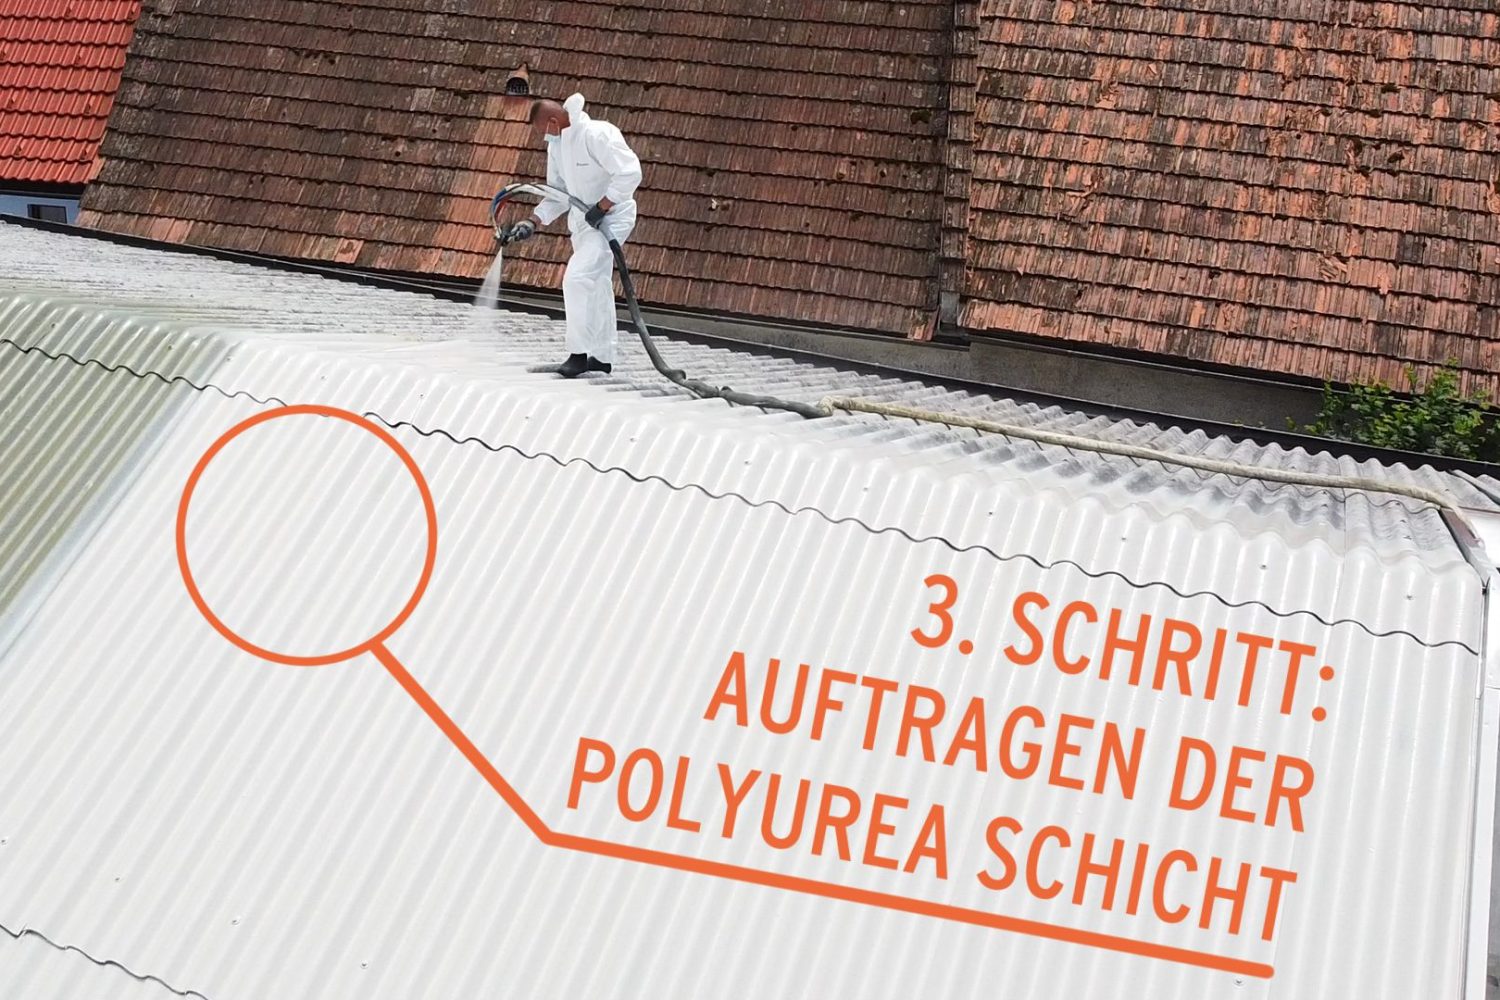 A man is painting a roof with Polyflex and polyurea.